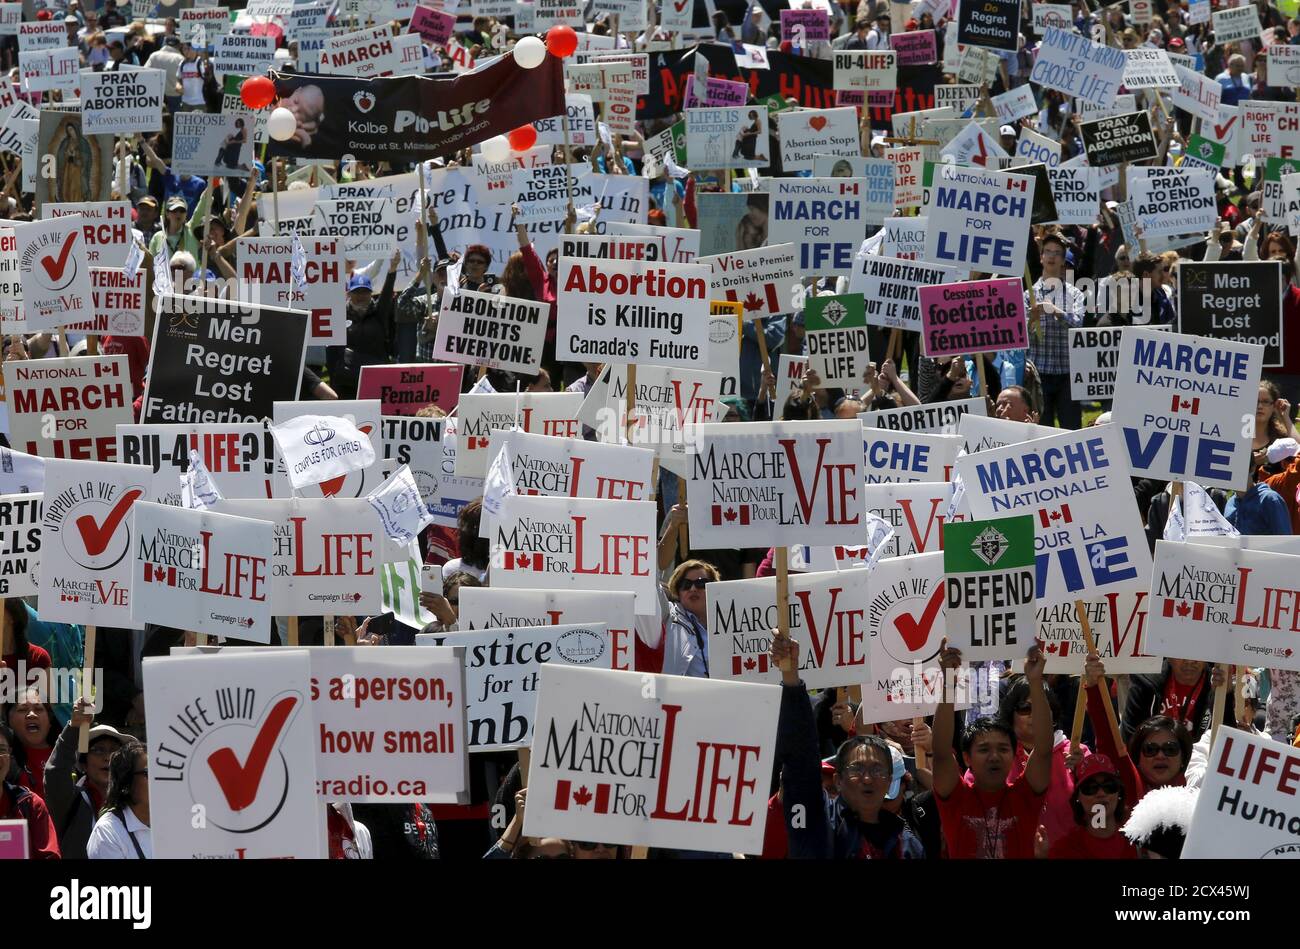 Demonstrators hold signs during an anti-abortion protest on Parliament Hill in Ottawa May 14, 2015. REUTERS/Chris Wattie Stock Photo